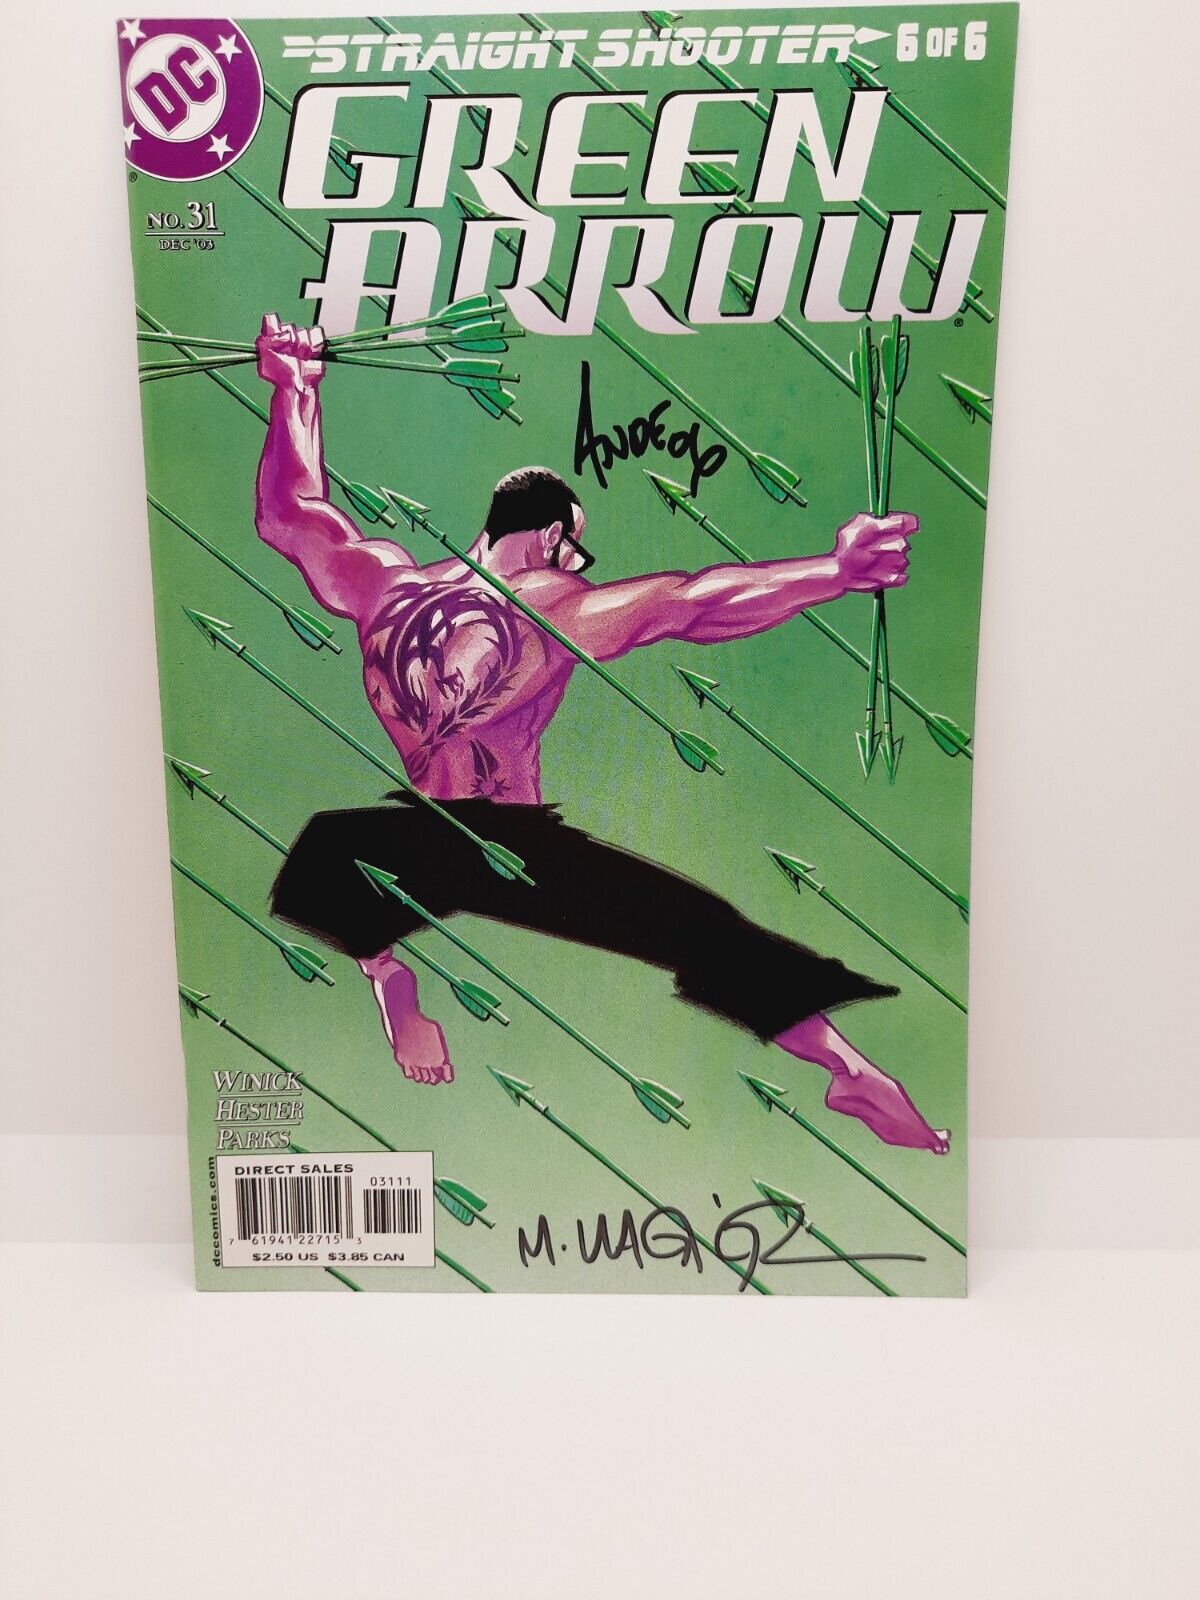 Green Arrow #31 DC Comics 2003 Signed by Ande Parks & Mike Mignola